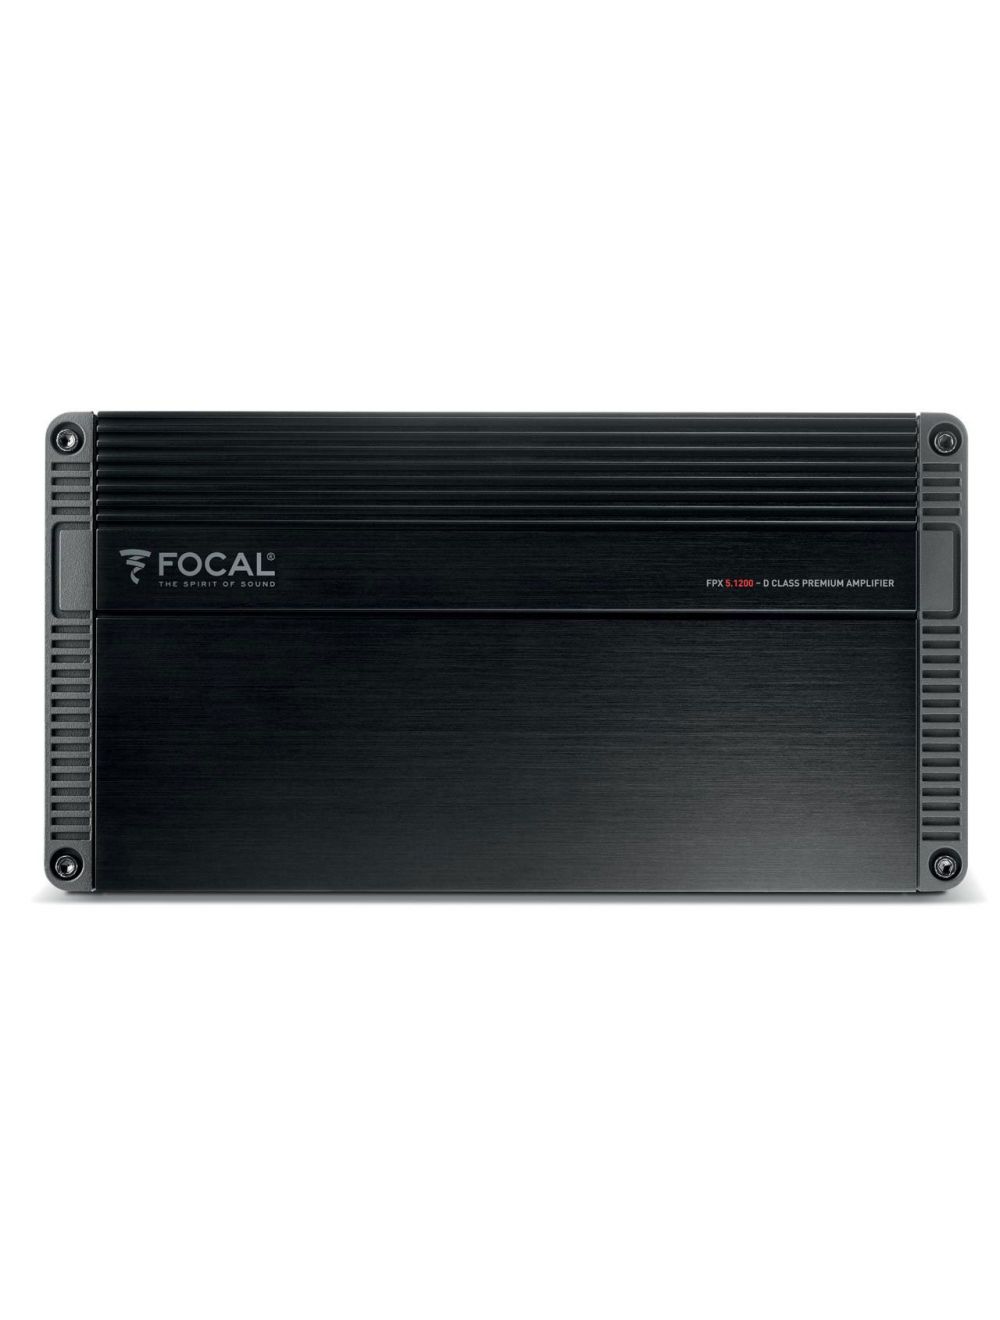 Focal FPX 5.1200 5 Channel amplifier, 4 x 75w and 1 x 700w, Class D